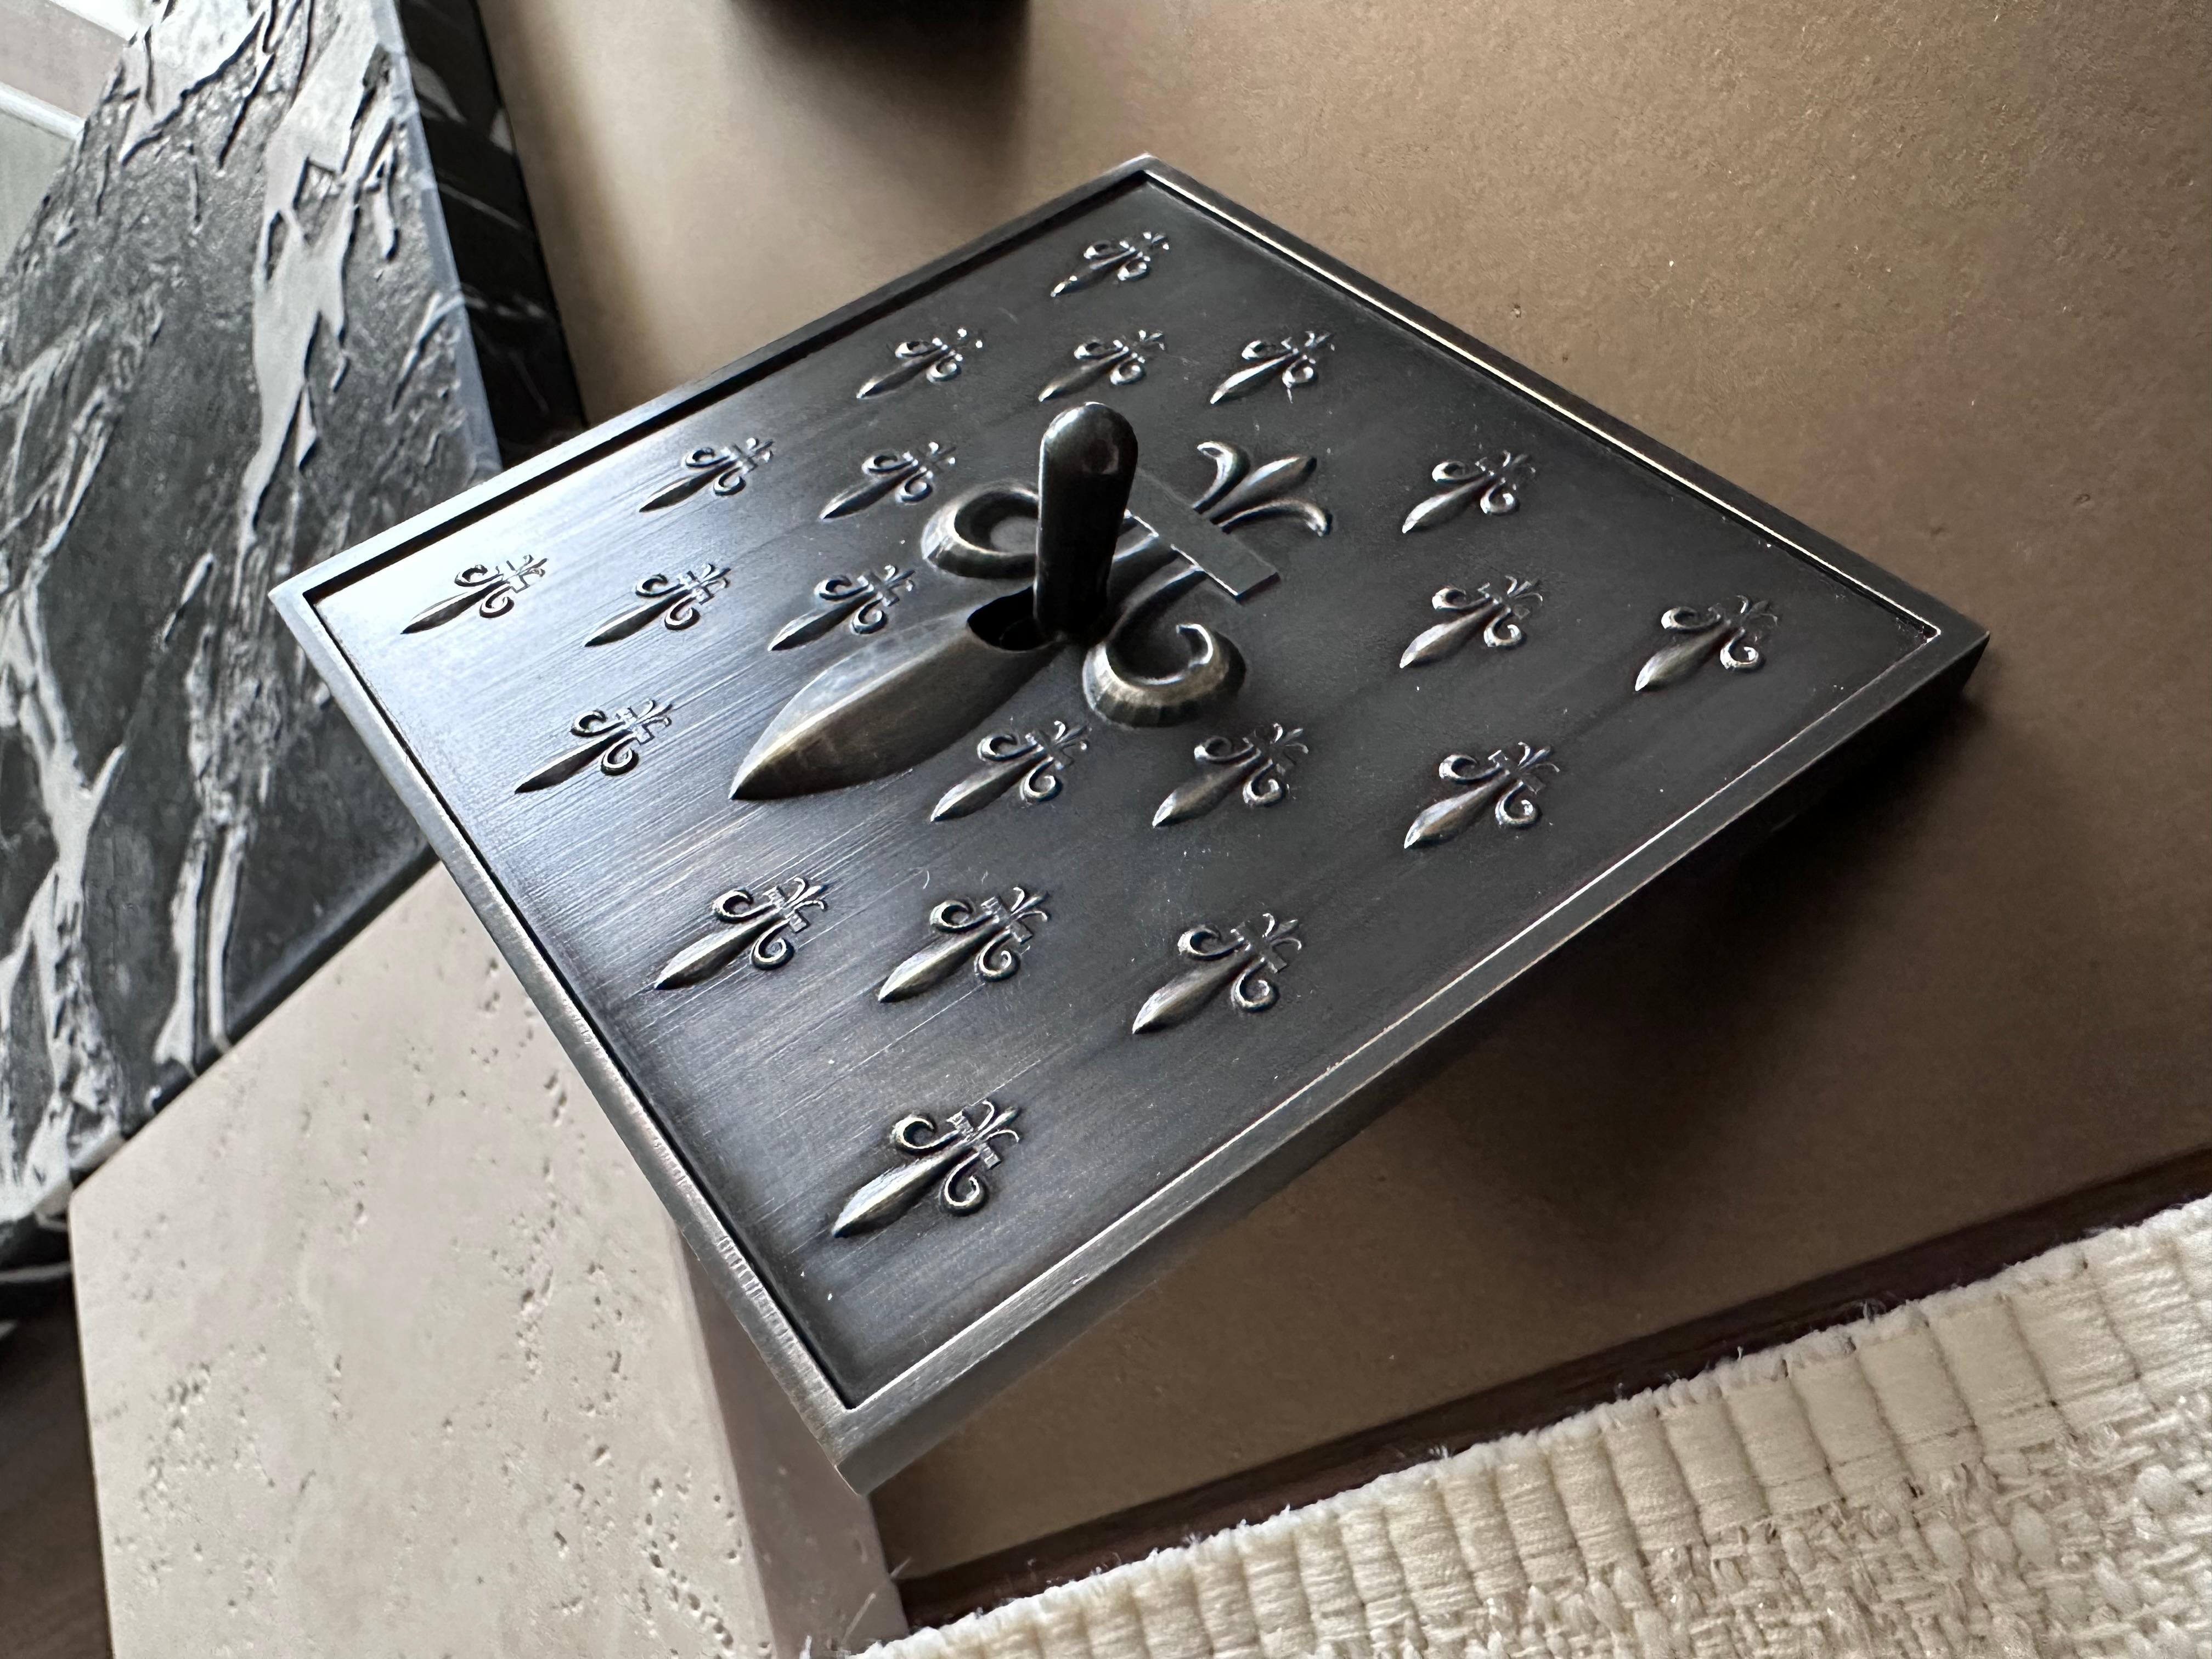 Fleur de Lys Versailles collection switch by Jerome Bugara.
Handcrafted by the art bronzier Rémy Garnier (France).

In brass with dark oxide finish.

Fitting to UK US or EU/FR standards.

Case compatibility to be defined after ordering.